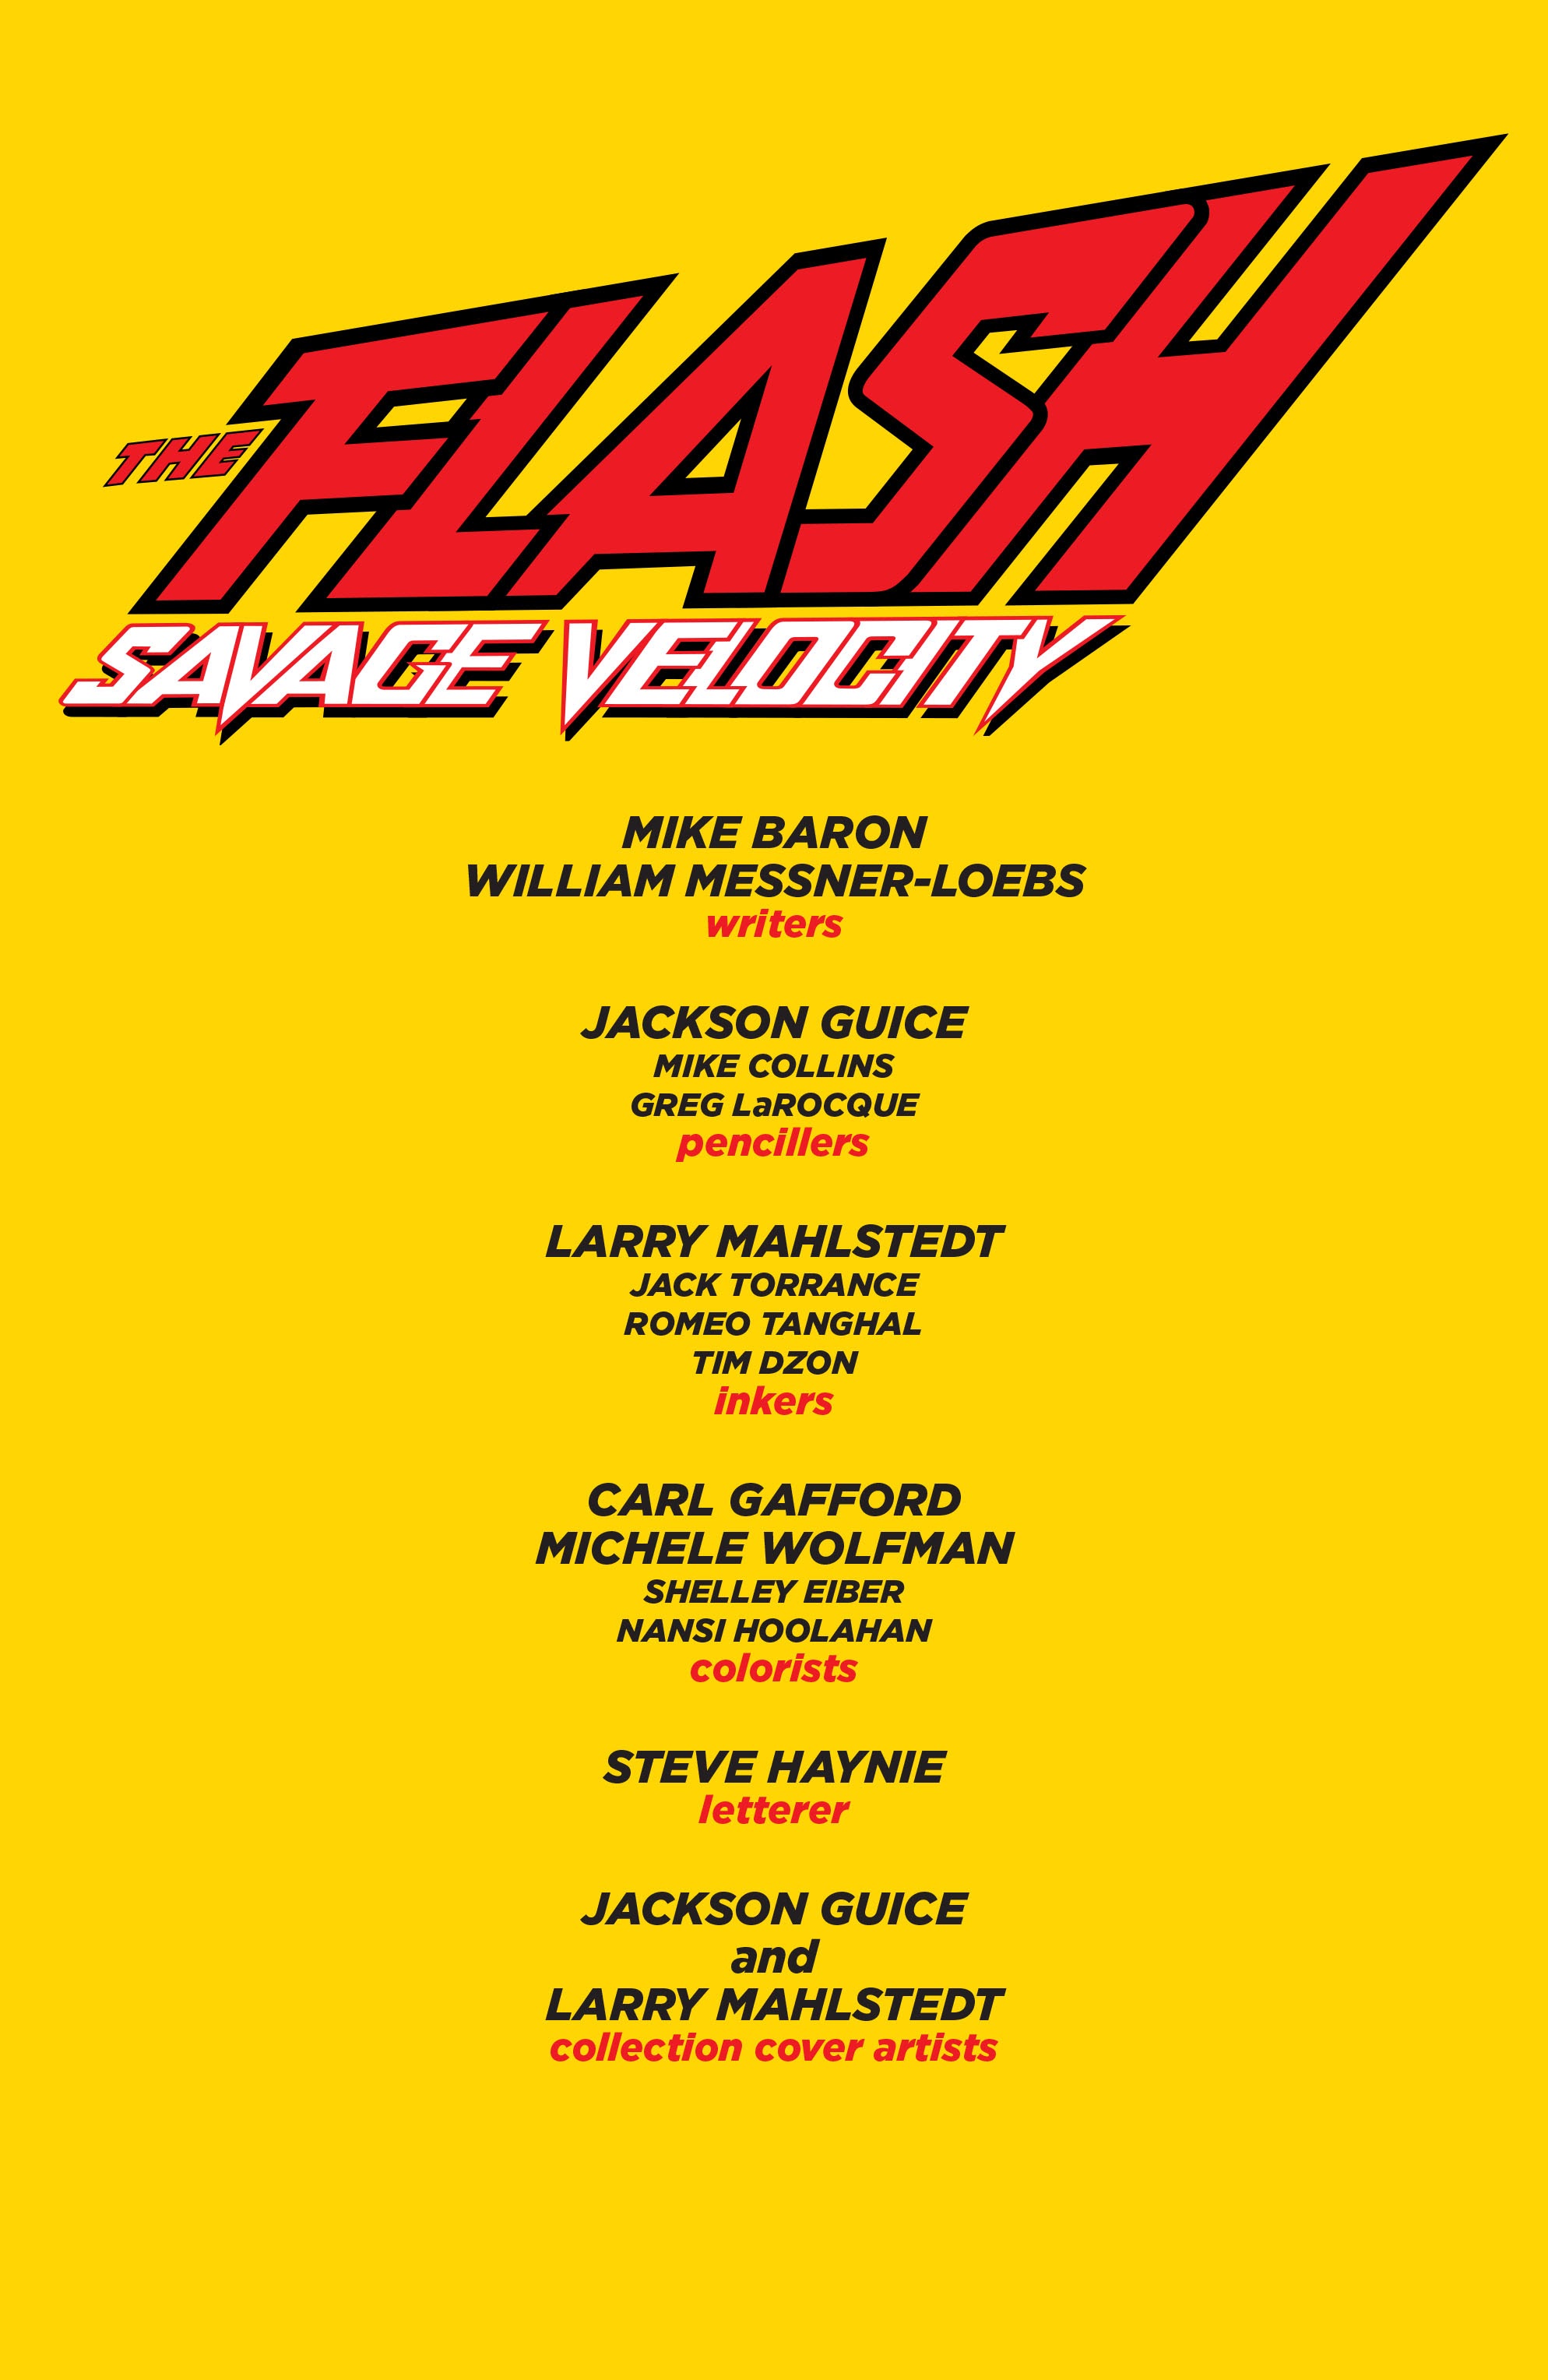 Read online The Flash: Savage Velocity comic -  Issue # TPB (Part 2) - 4